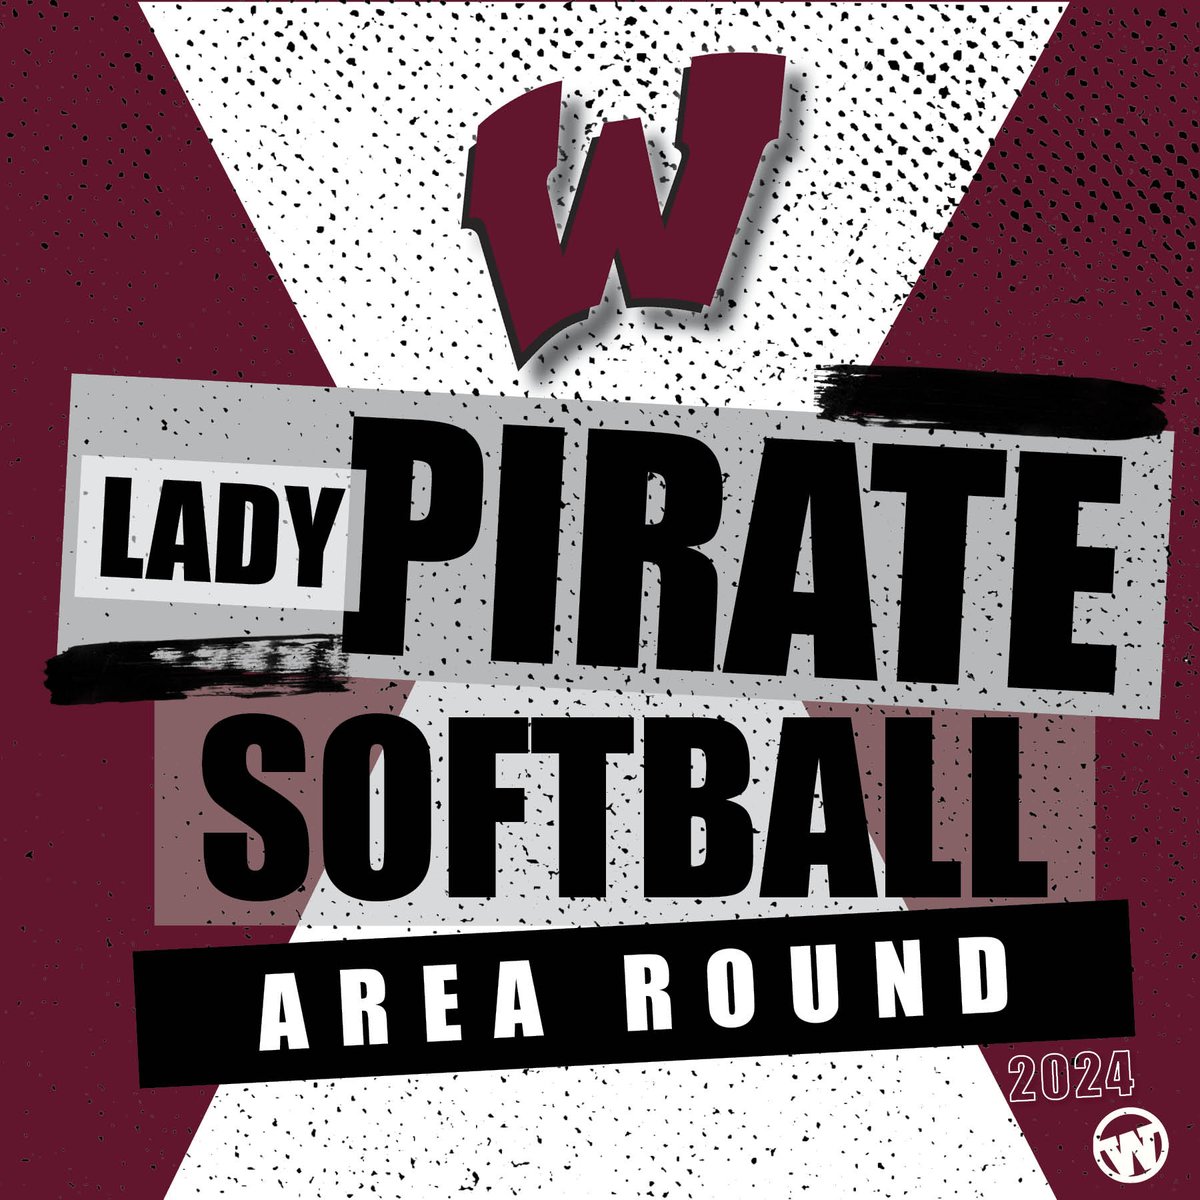 𝐖𝐲𝐥𝐢𝐞 𝐇𝐢𝐠𝐡 𝐒𝐜𝐡𝐨𝐨𝐥 𝐋𝐚𝐝𝐲 𝐏𝐢𝐫𝐚𝐭𝐞 𝐒𝐨𝐟𝐭𝐛𝐚𝐥𝐥 competes in the Area Round Friday, May 3 at 6:30 p.m. at Coppell High School. 𝑇ℎ𝑖𝑠 𝑖𝑠 𝑎 𝑠𝑖𝑛𝑔𝑙𝑒-𝑔𝑎𝑚𝑒 𝑝𝑙𝑎𝑦𝑜𝑓𝑓 𝑚𝑎𝑡𝑐ℎ. Come out and support these ladies as they take on Mansfield!